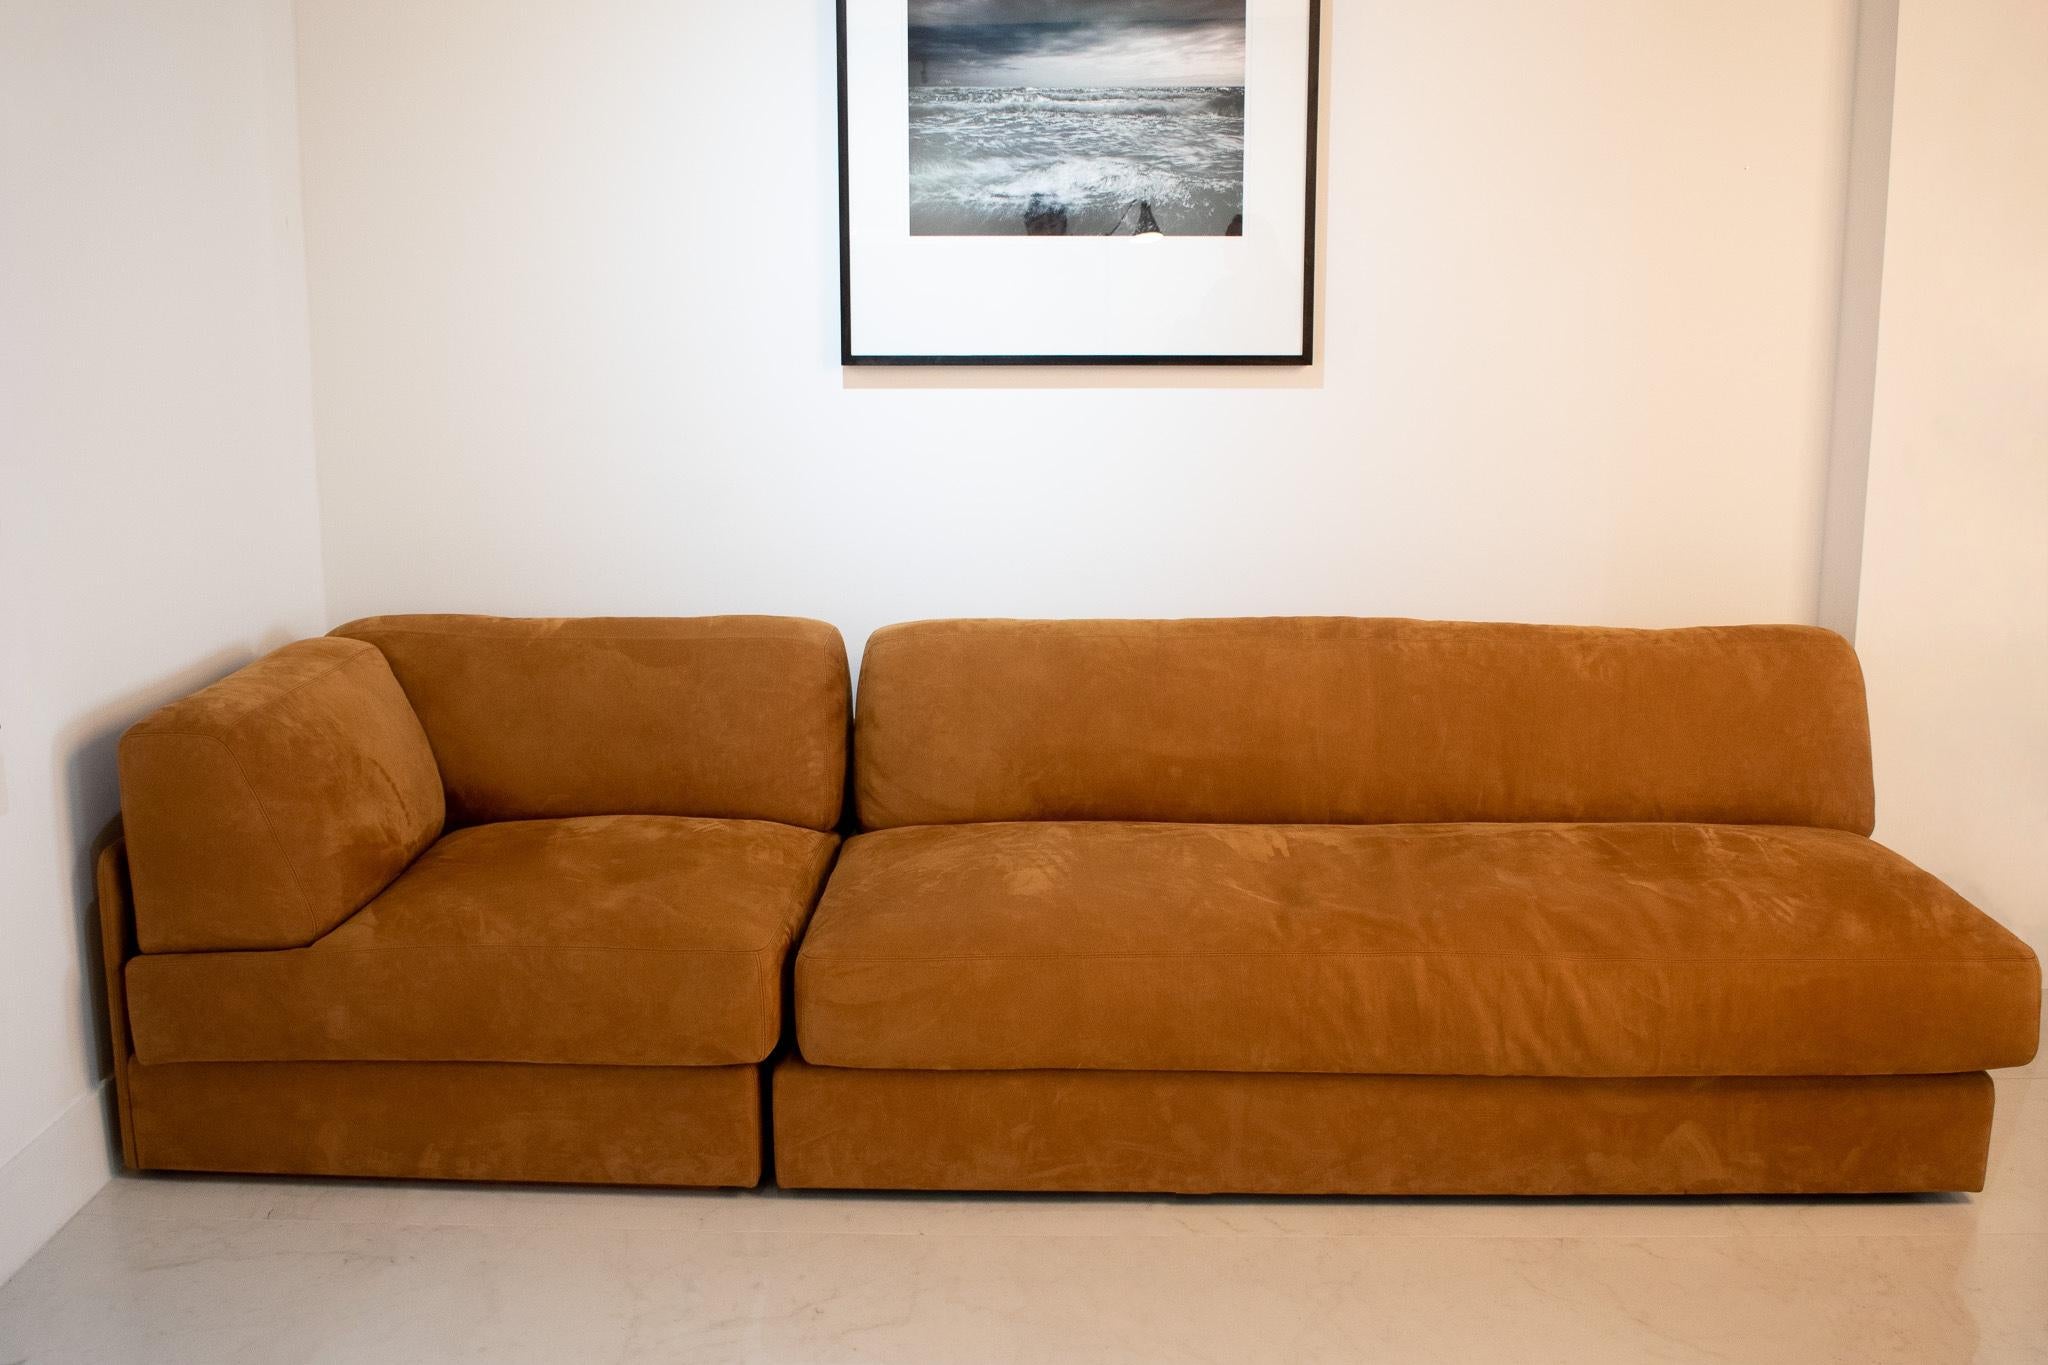 The 'Franco' is a highly customisable modular sofa hand made in the U.K. Its made with thick cushioned seats, back and arm rests for maximum comfort.
The dimensions we have provided are for the sofa in our store - shown in photos. The item in this